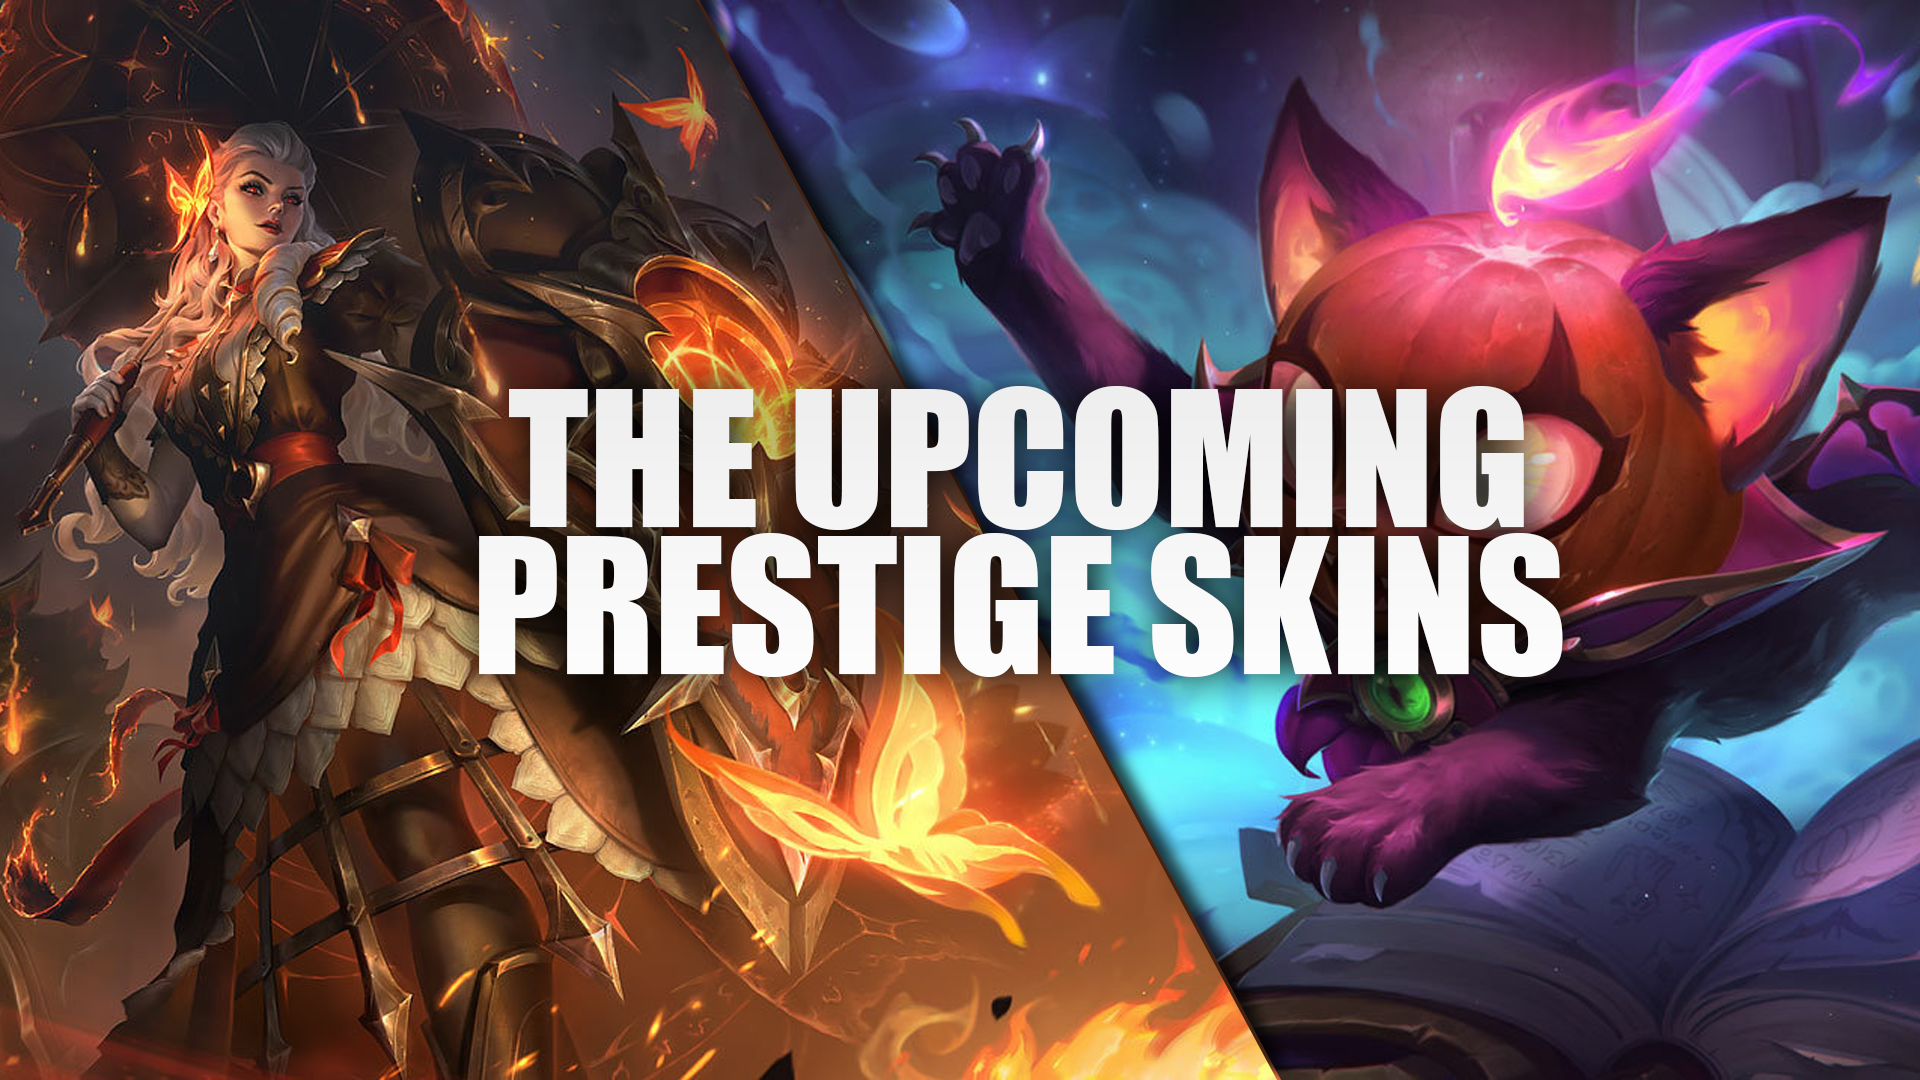 The Upcoming Prestige Skins that you already knew about are Evelynn and Kayle. Evelynn's Prestige Skin is already available in the High Noon 2024 Pass for 2000 Event Tokens. Kayle's Prestige Skin is also coming, and you'll be able to get it with Event Tokens too.